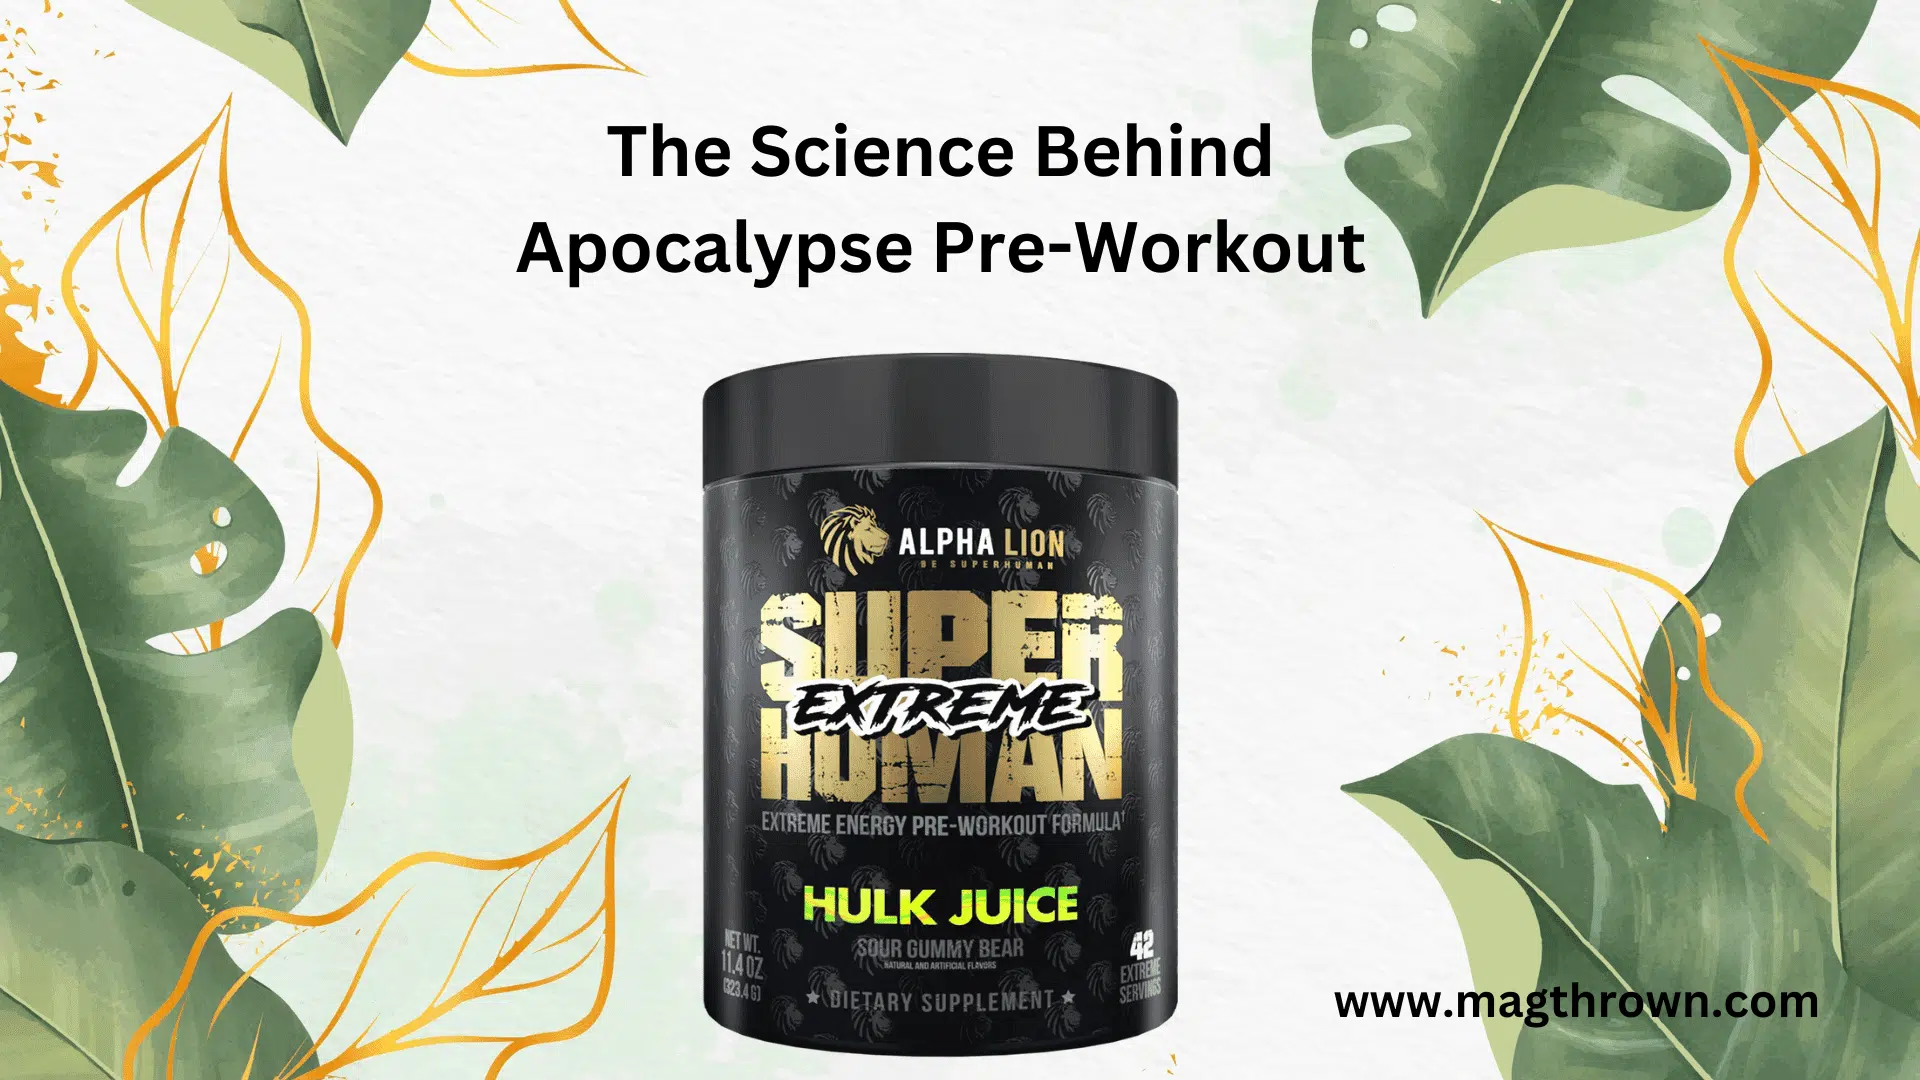 Discussing Apocalypse Pre-Workout